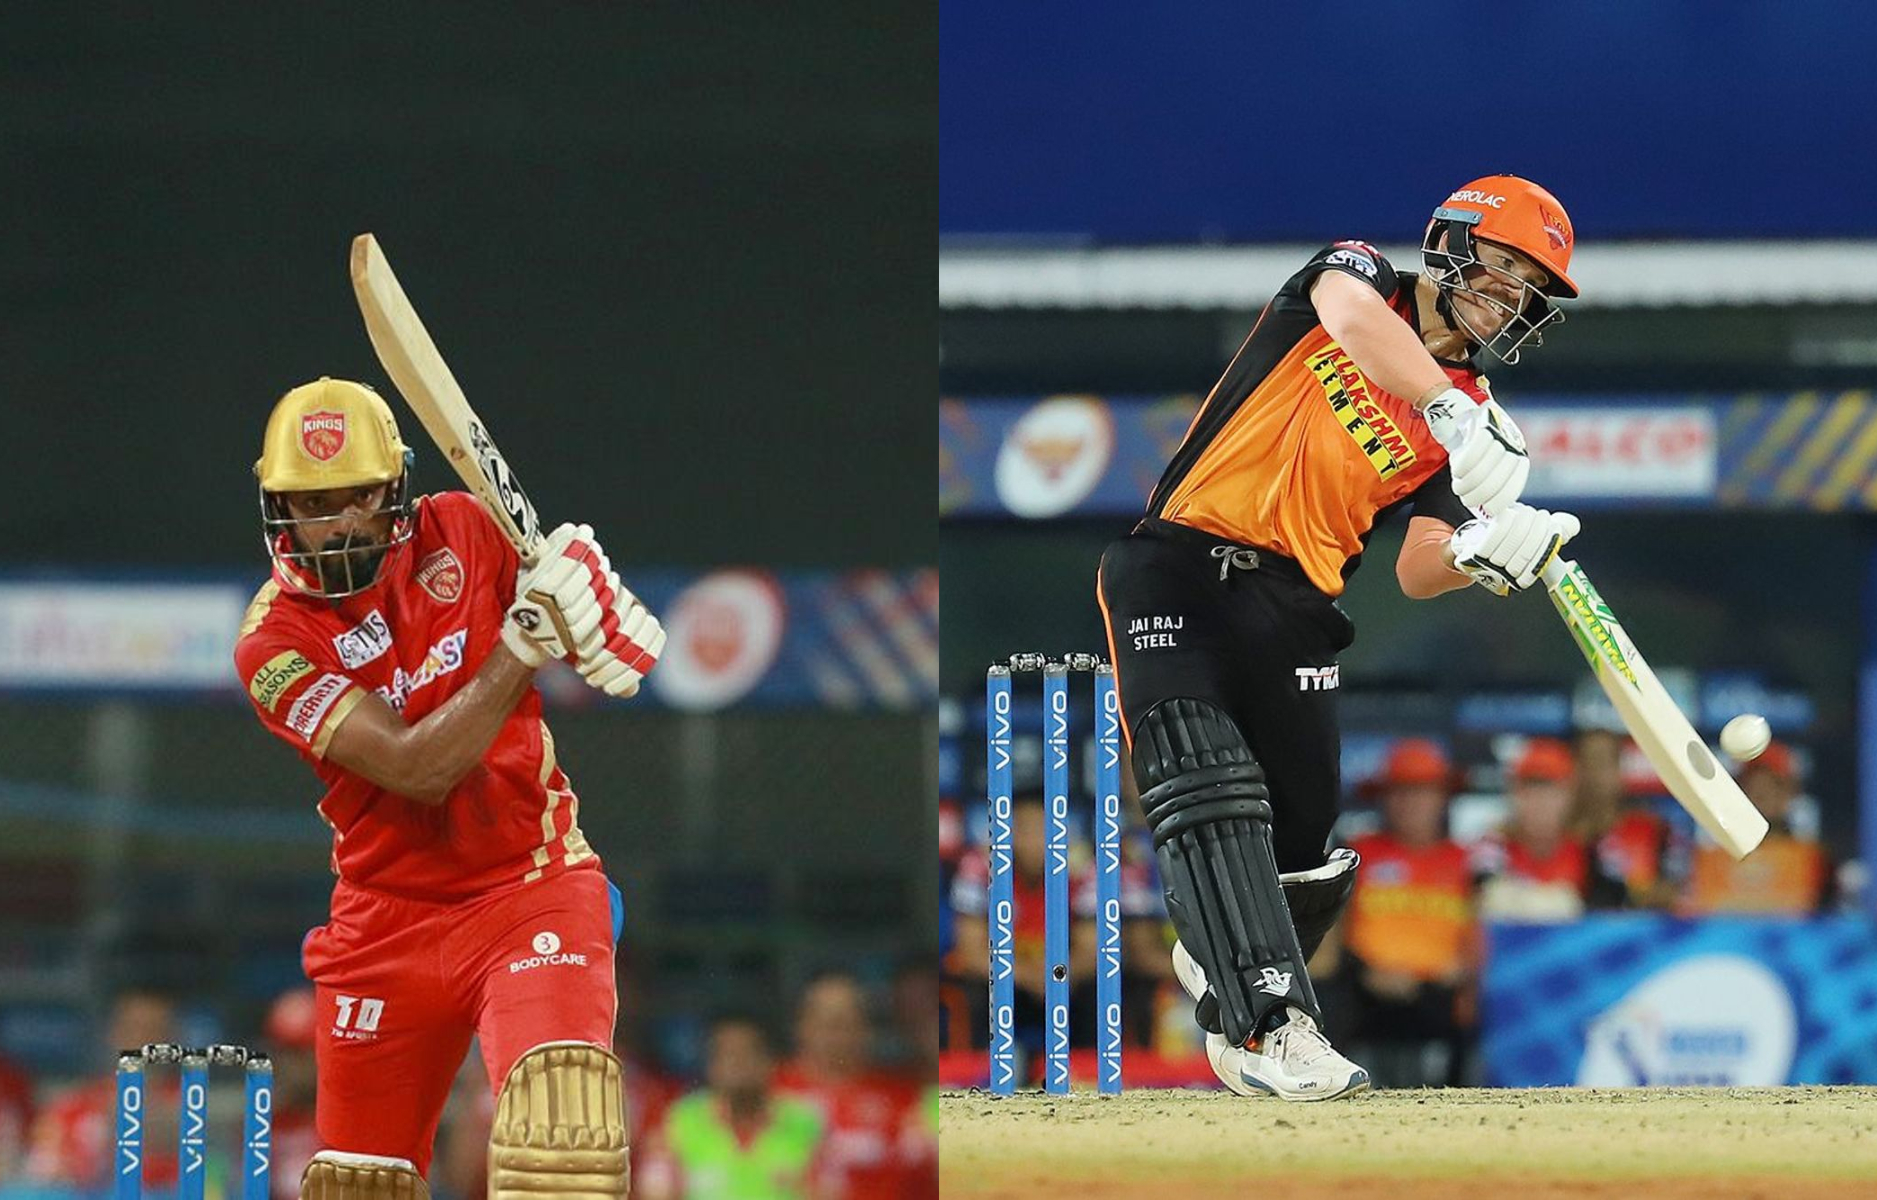 SRH is yet to win a match in IPL 2021, while PBKS have won one encounter | BCCI-IPL